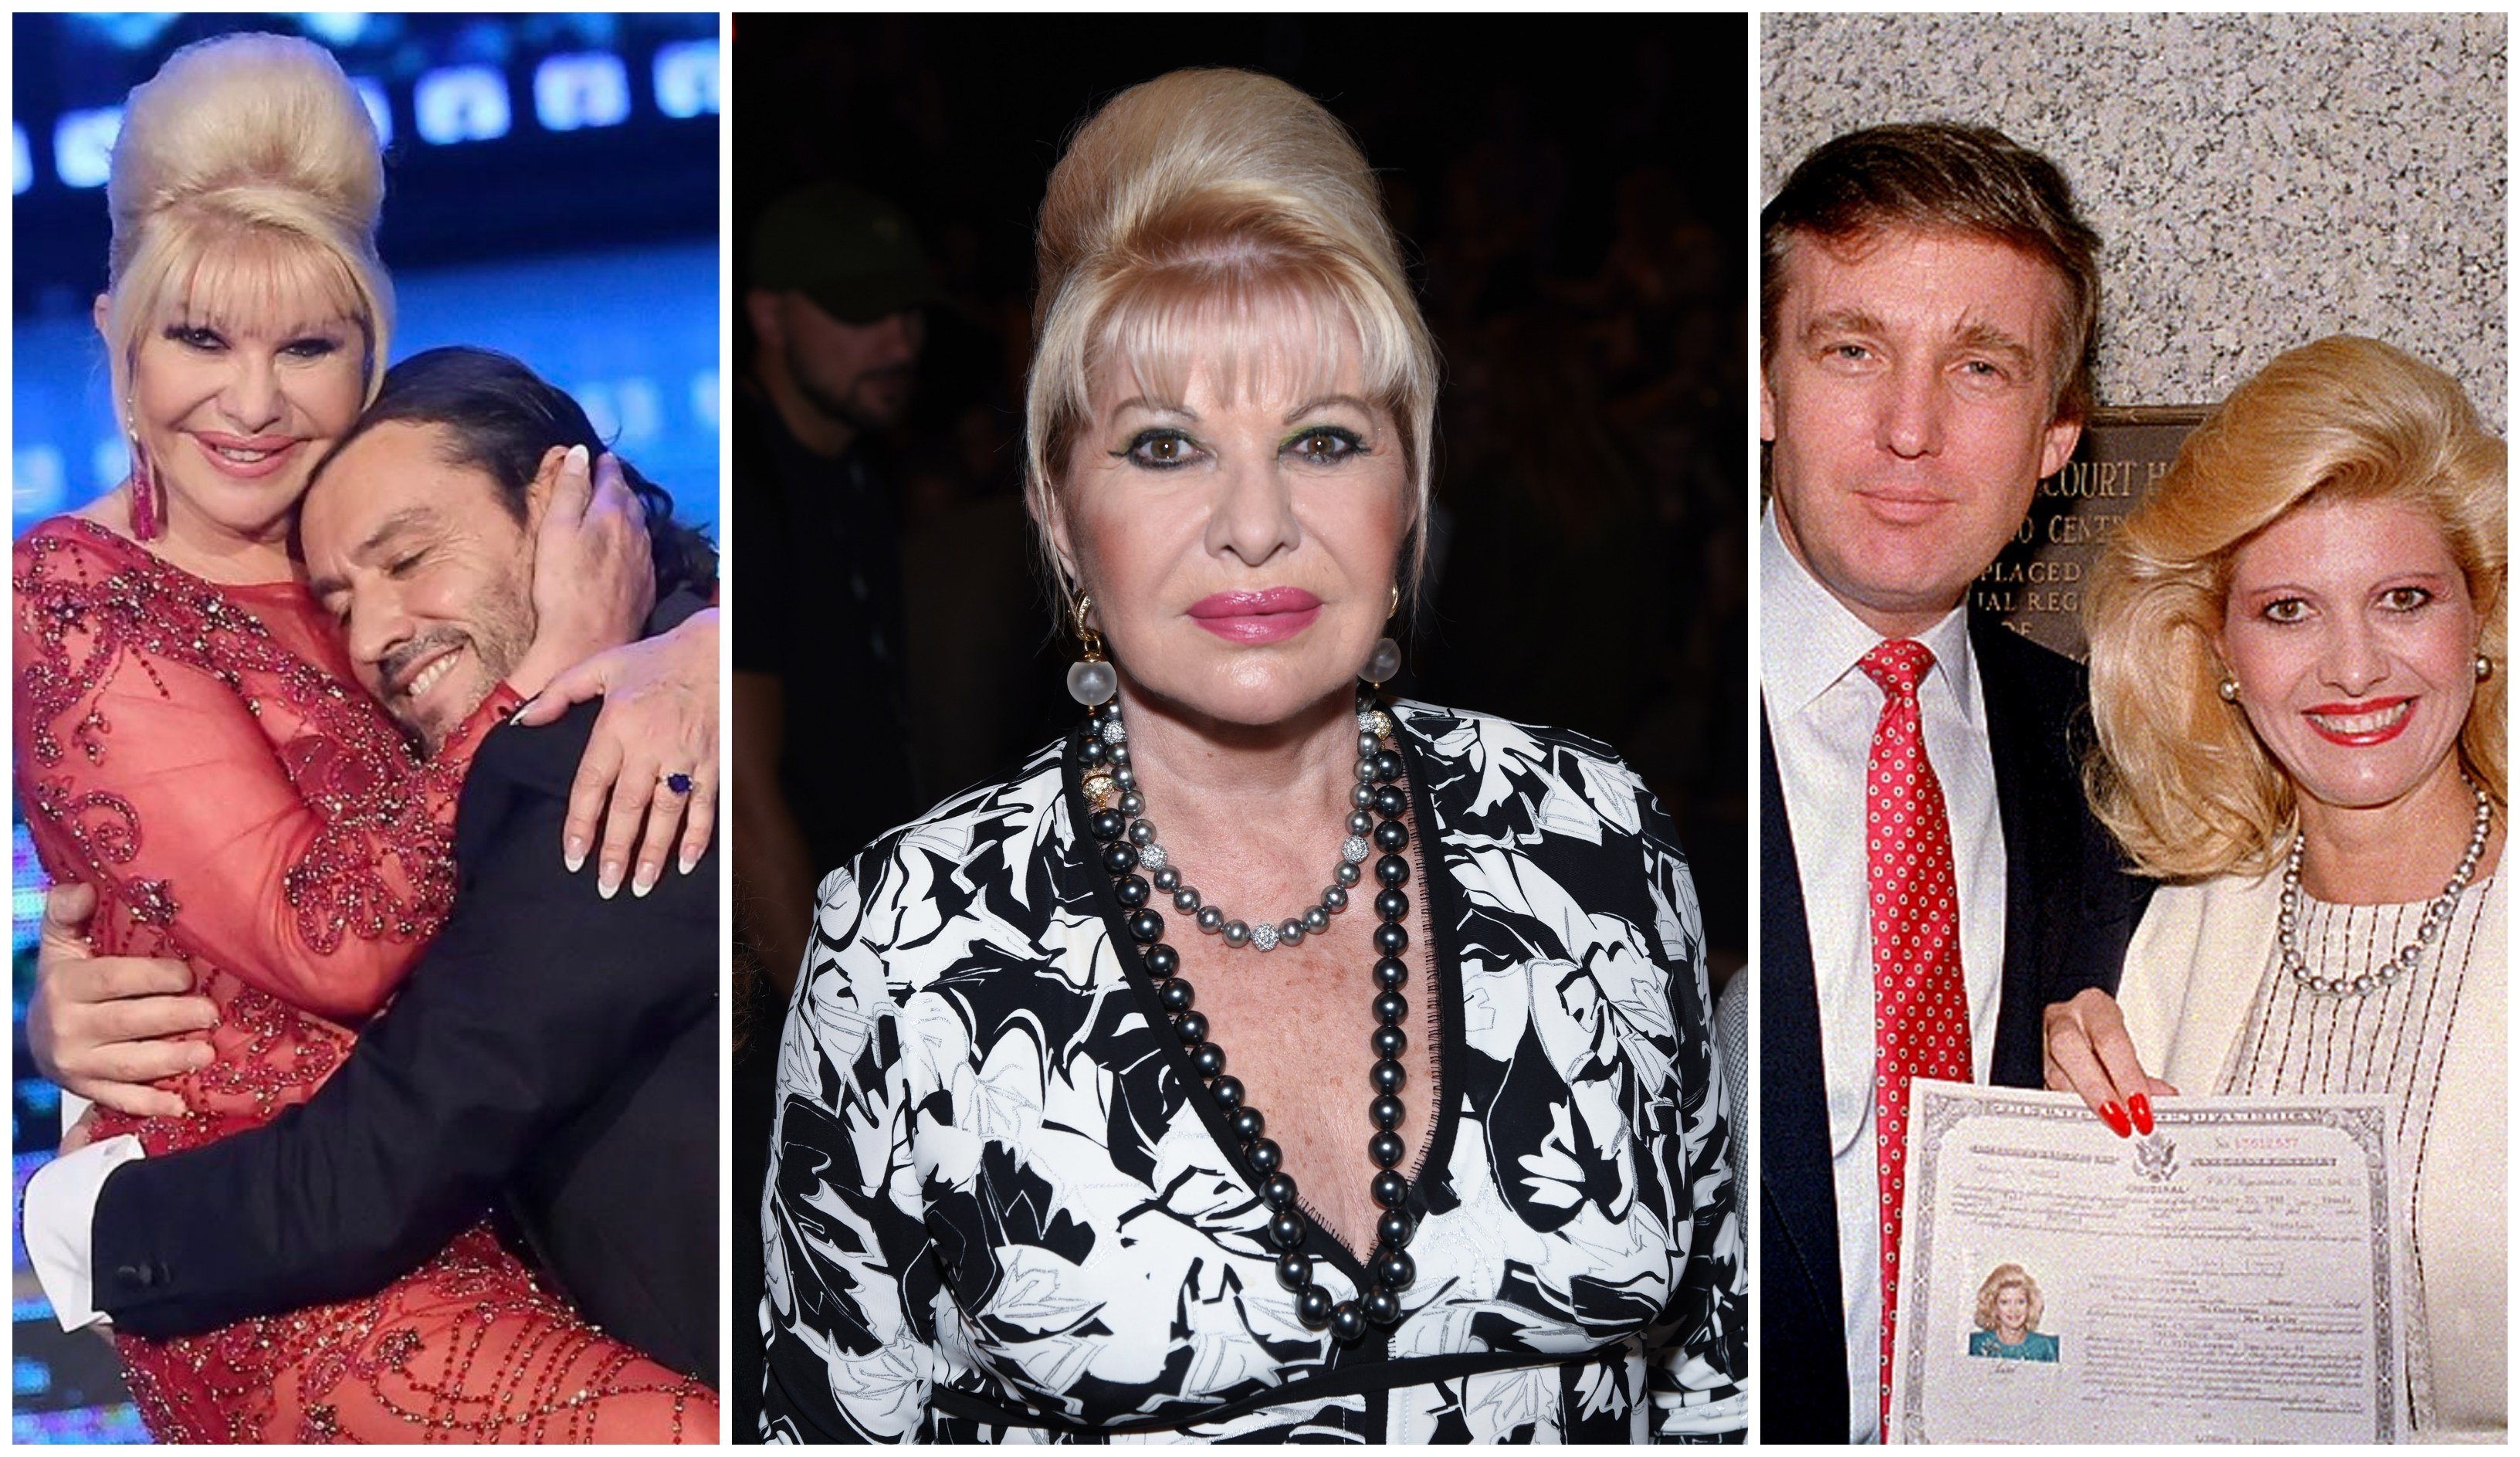 She may have been single when she died, but Ivana Trump was married four times, including to Rossano Rubicondi (left) and Donald Trump (right), of course. Photos: @NotHoodlum/Twitter, MCT, AP